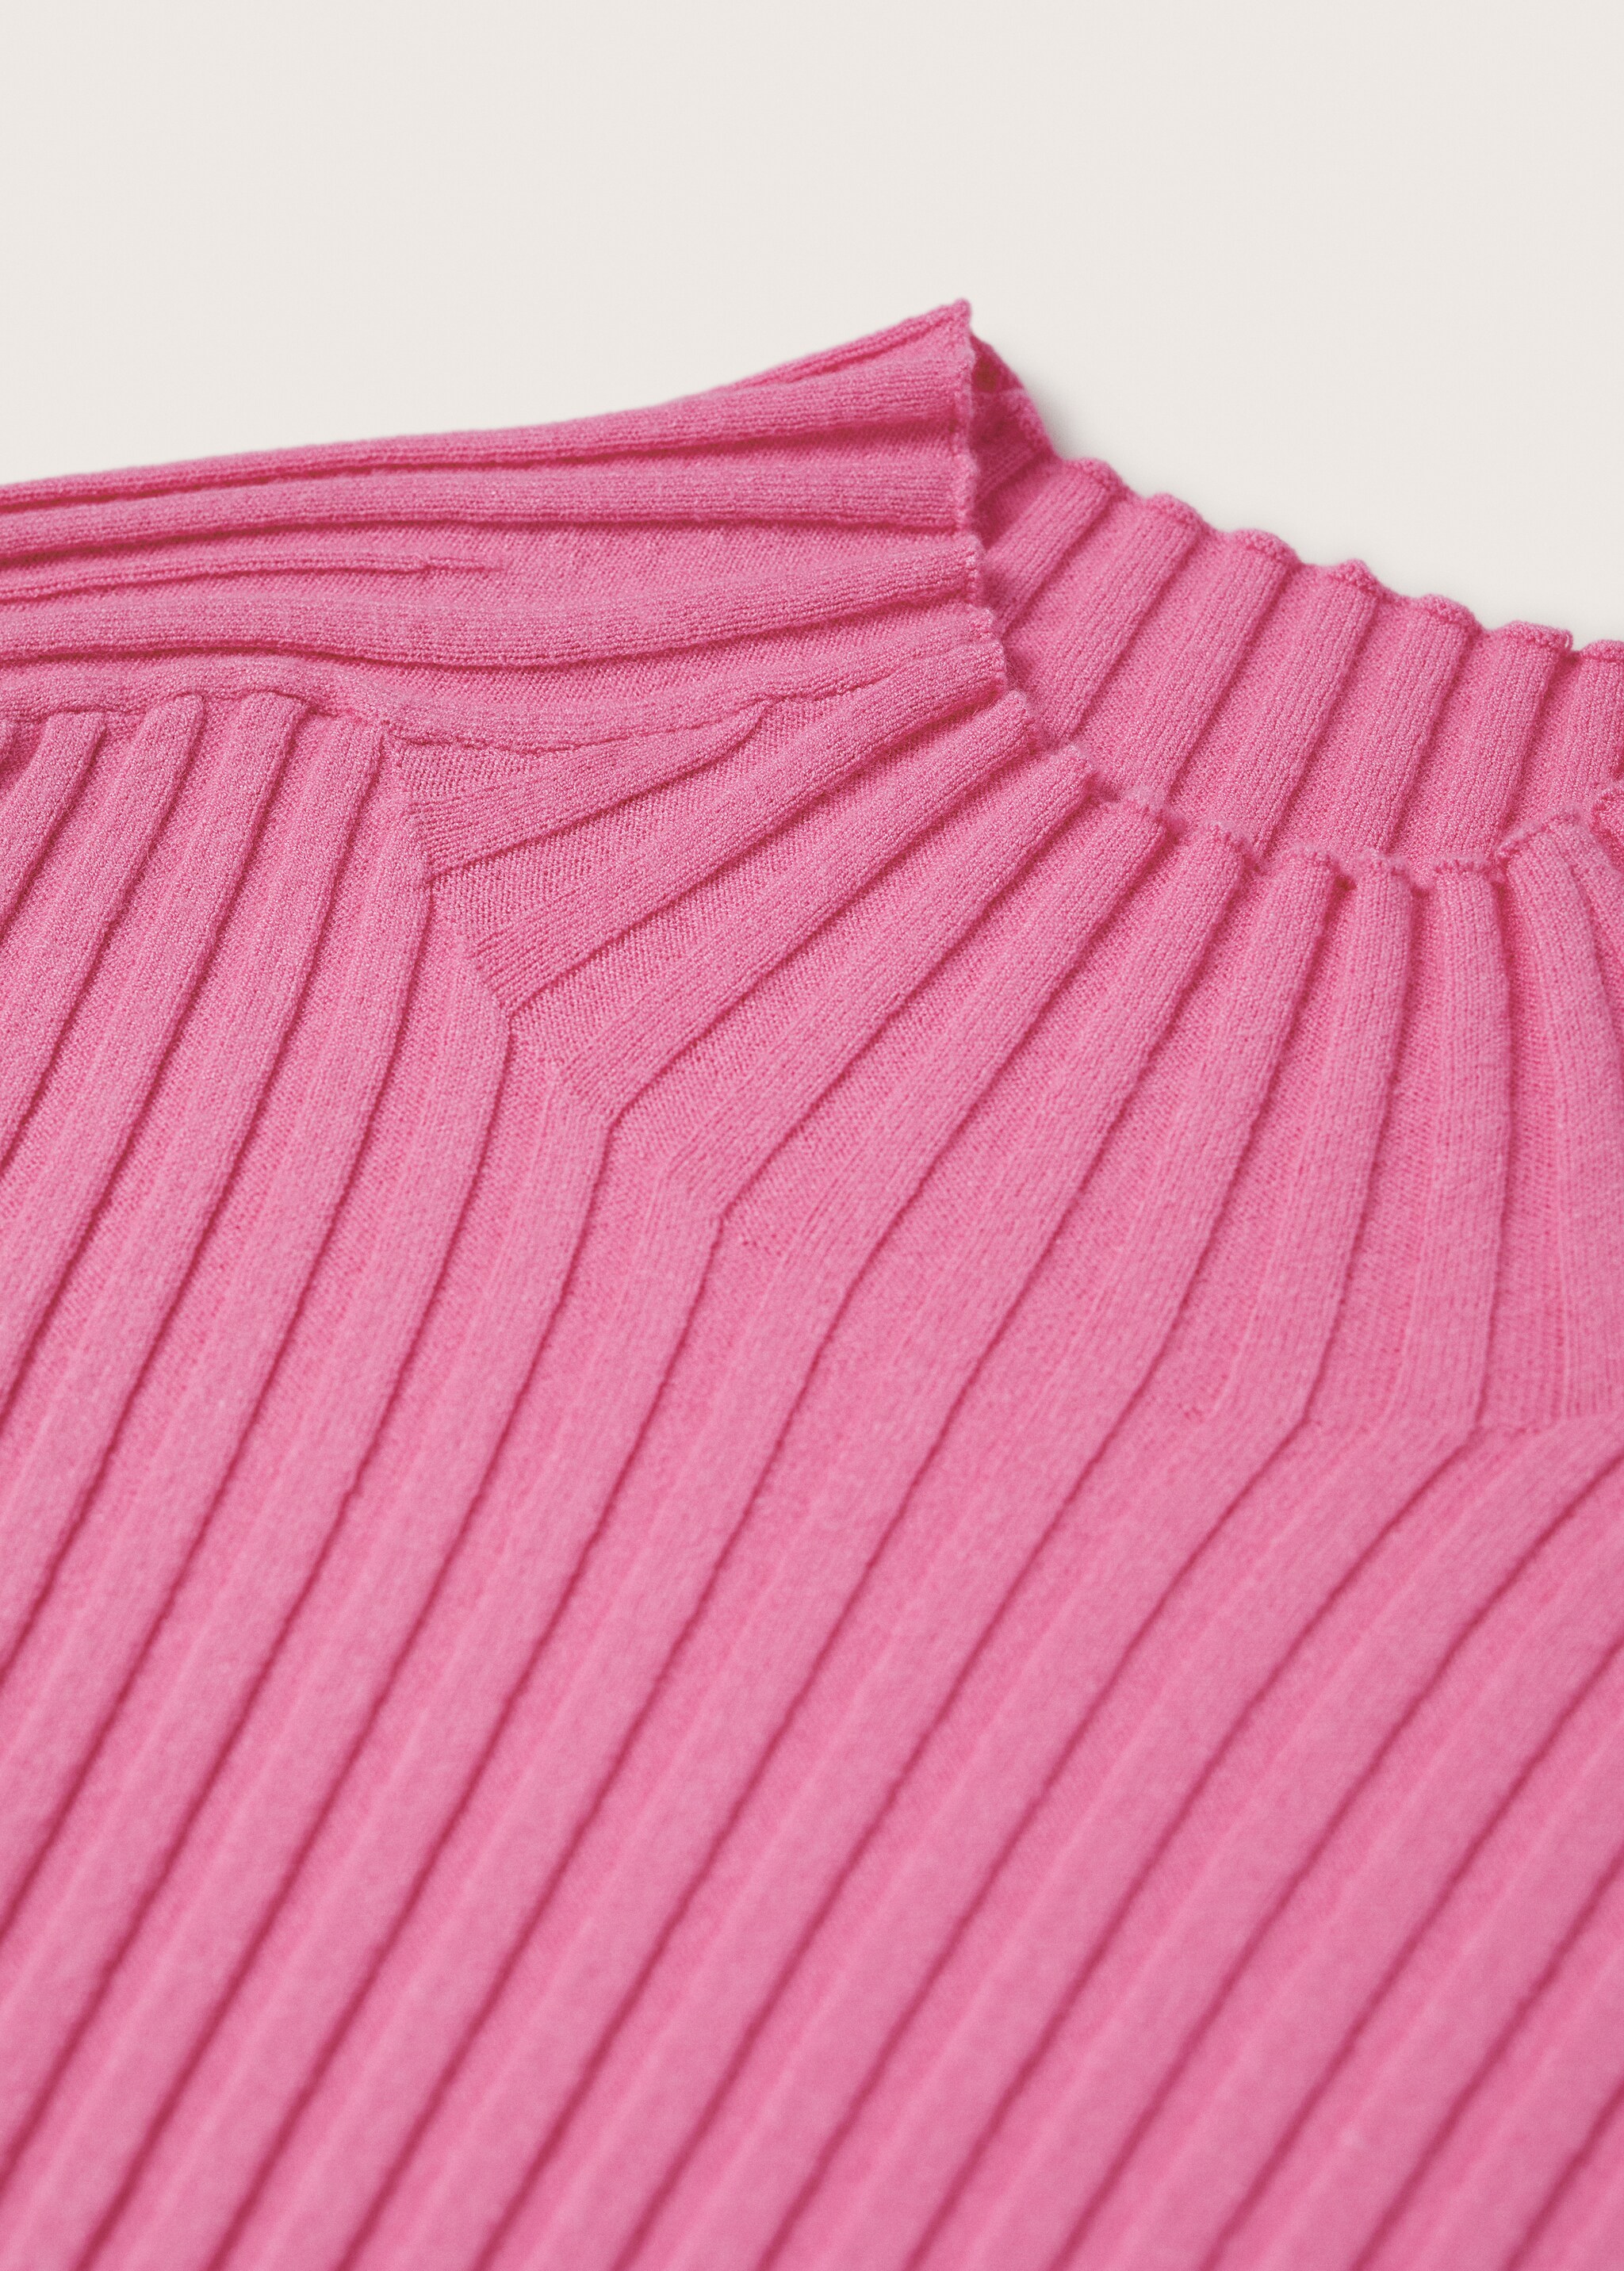 Ribbed knit sweater - Details of the article 8